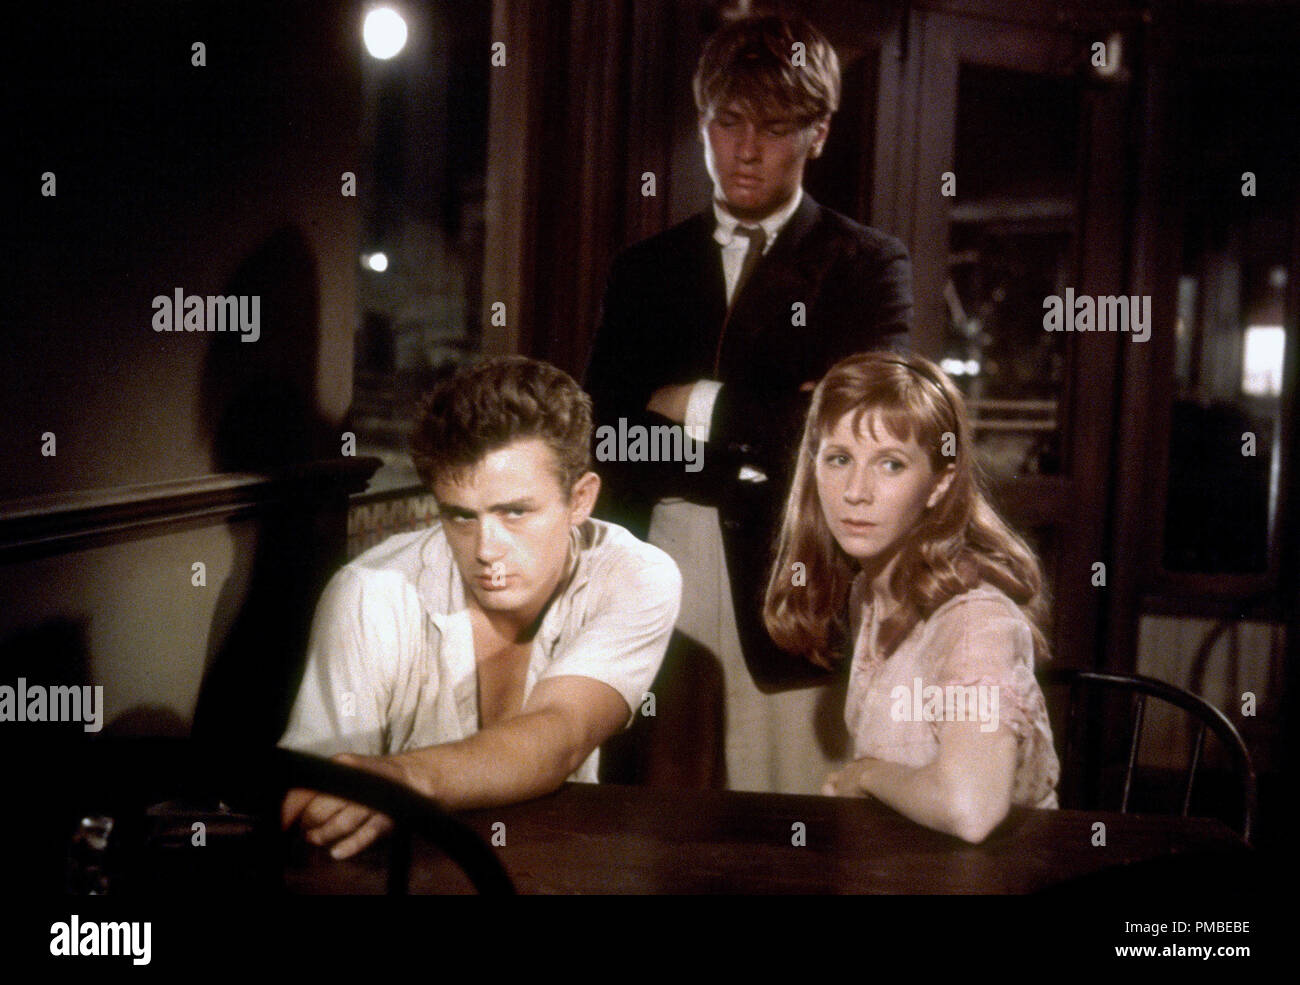 James Dean, Julie Harris and Richard Davalos, "East of Eden" 1955 Warner Bros. File Reference # 33371_603THA Stock Photo